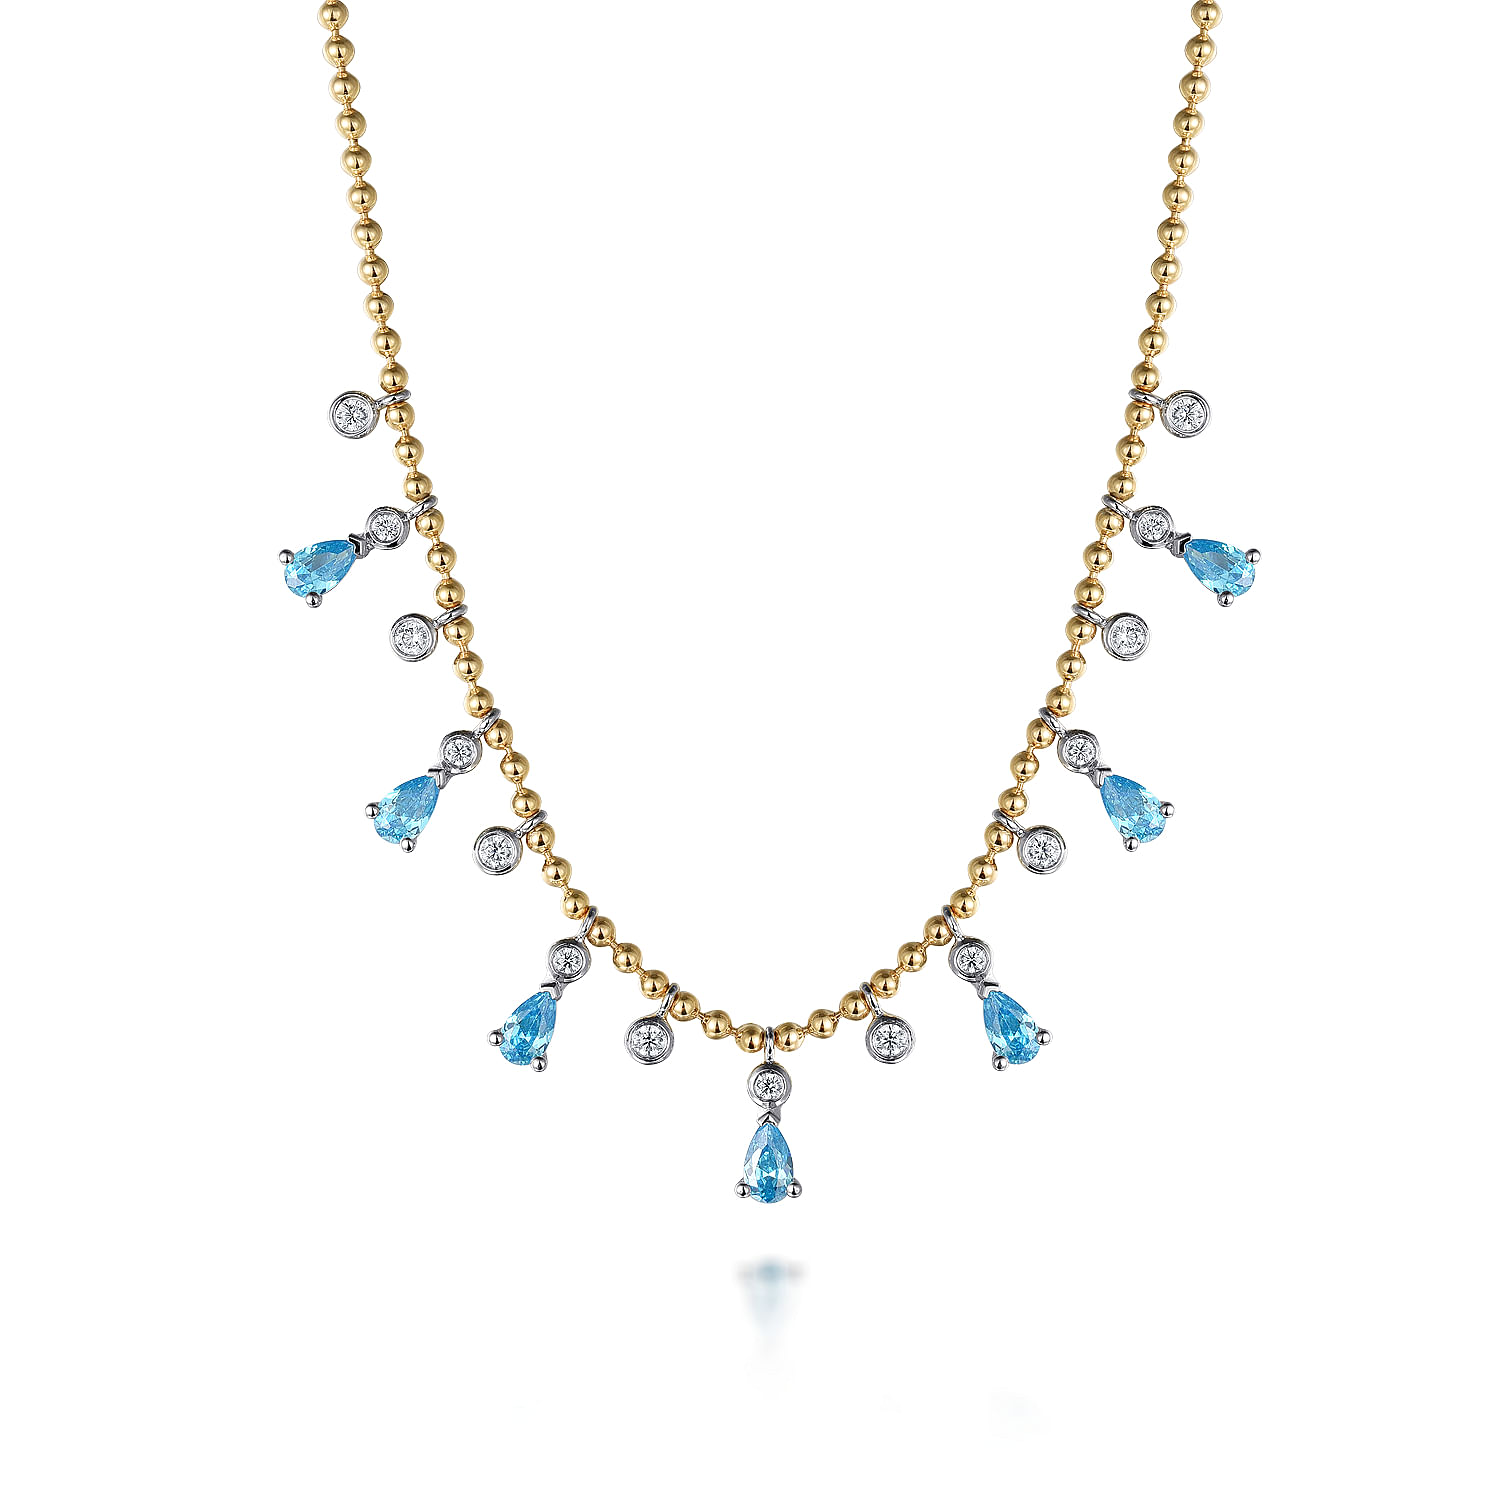 14K White and Yellow Gold Bead Chain Diamond and Blue Topaz Droplet Necklace